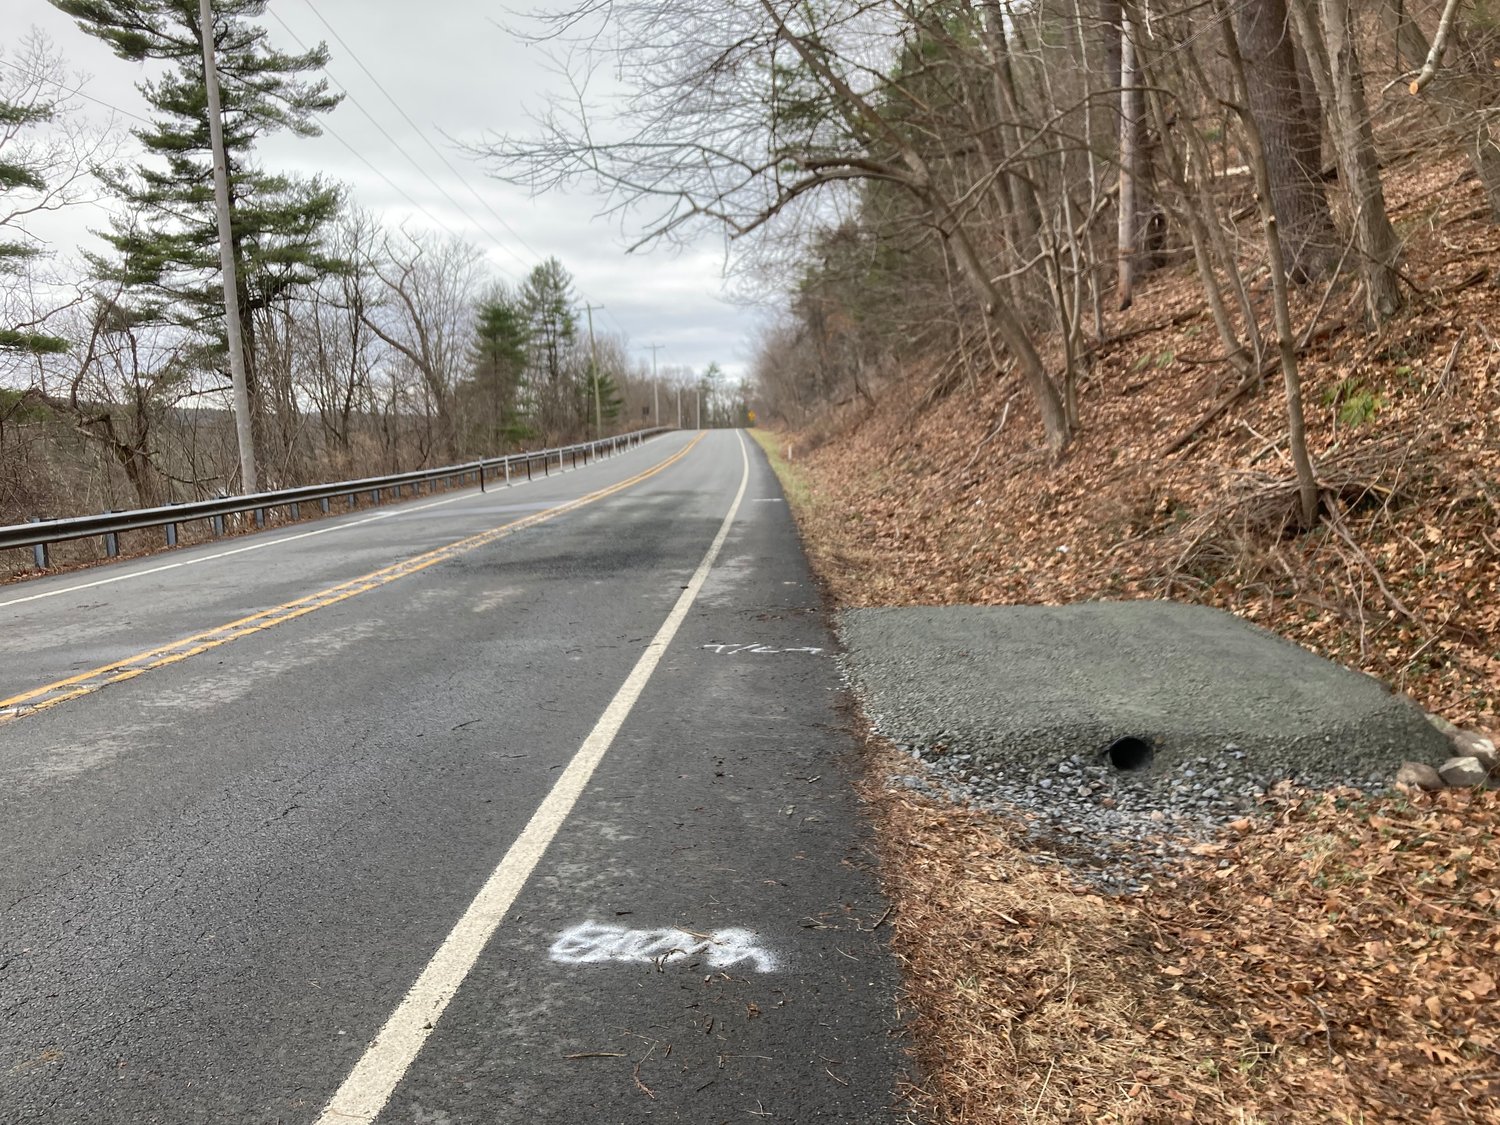 When a traffic light is installed on this pad, a single lane of traffic will open up this major artery between Route 729 and Raymondskill Road, just south of Milford.